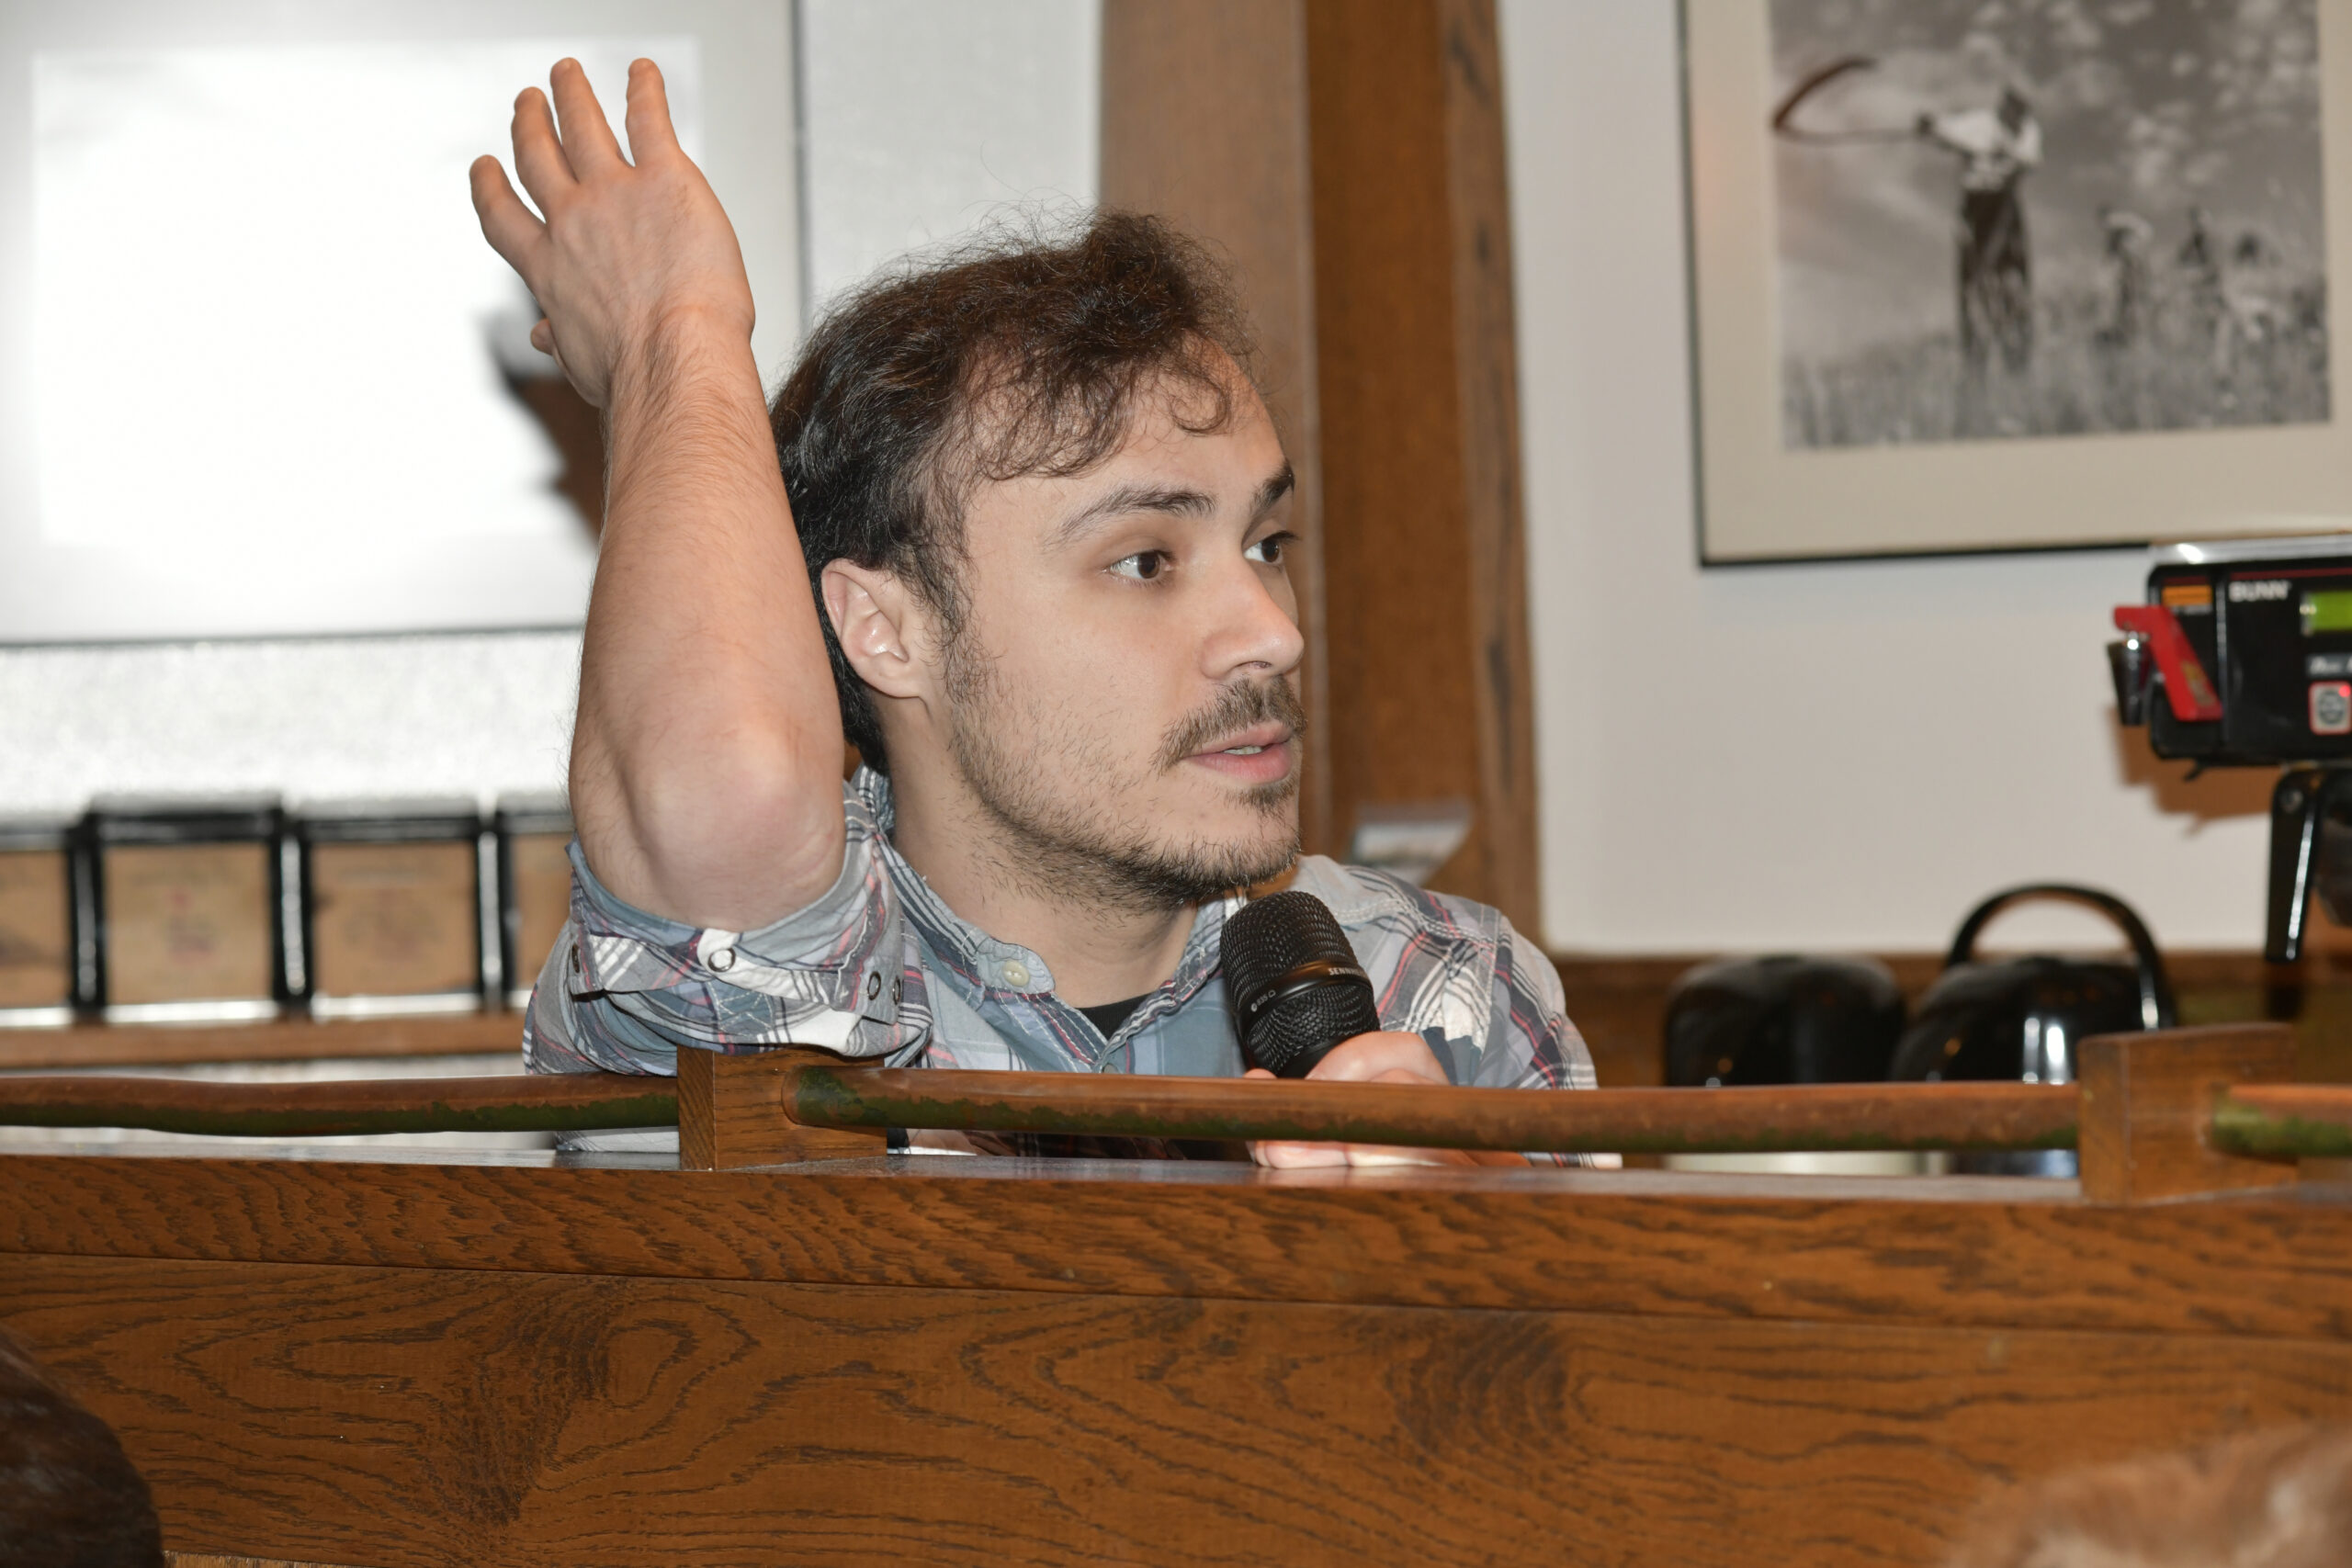 Christopher Lopez asks a question at the Express Session in East Hampton on January 9.  DANA SHAW